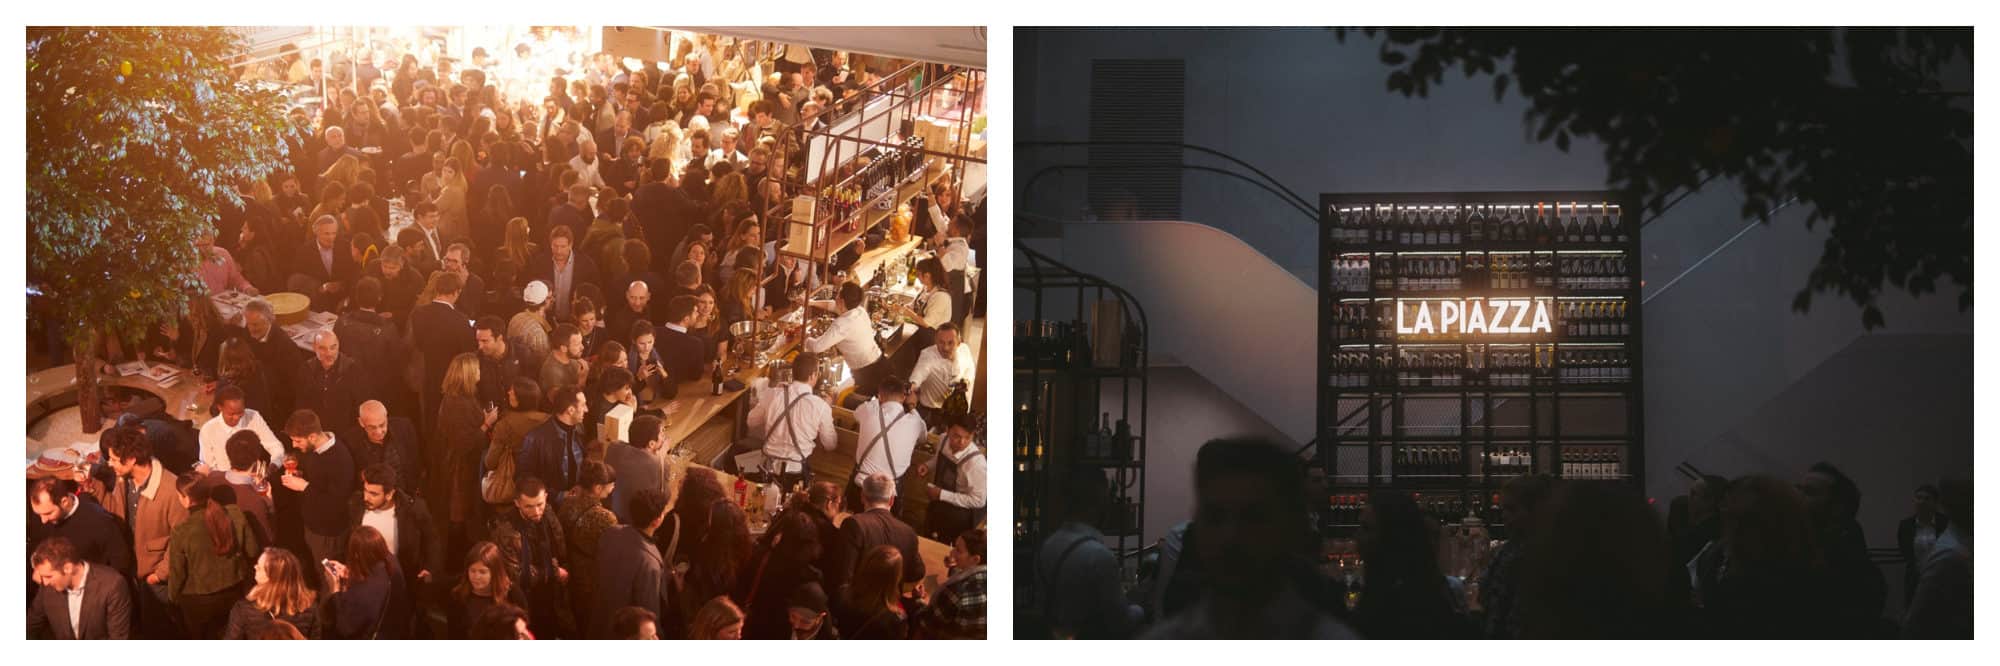 The crowds of punters at Eataly, the new epicenter for Italian food in Paris, come to enjoy a Spritz or two after work (left). The 'La Piazza' neon sign on the exterior of the Eataly buliding in Paris (right).